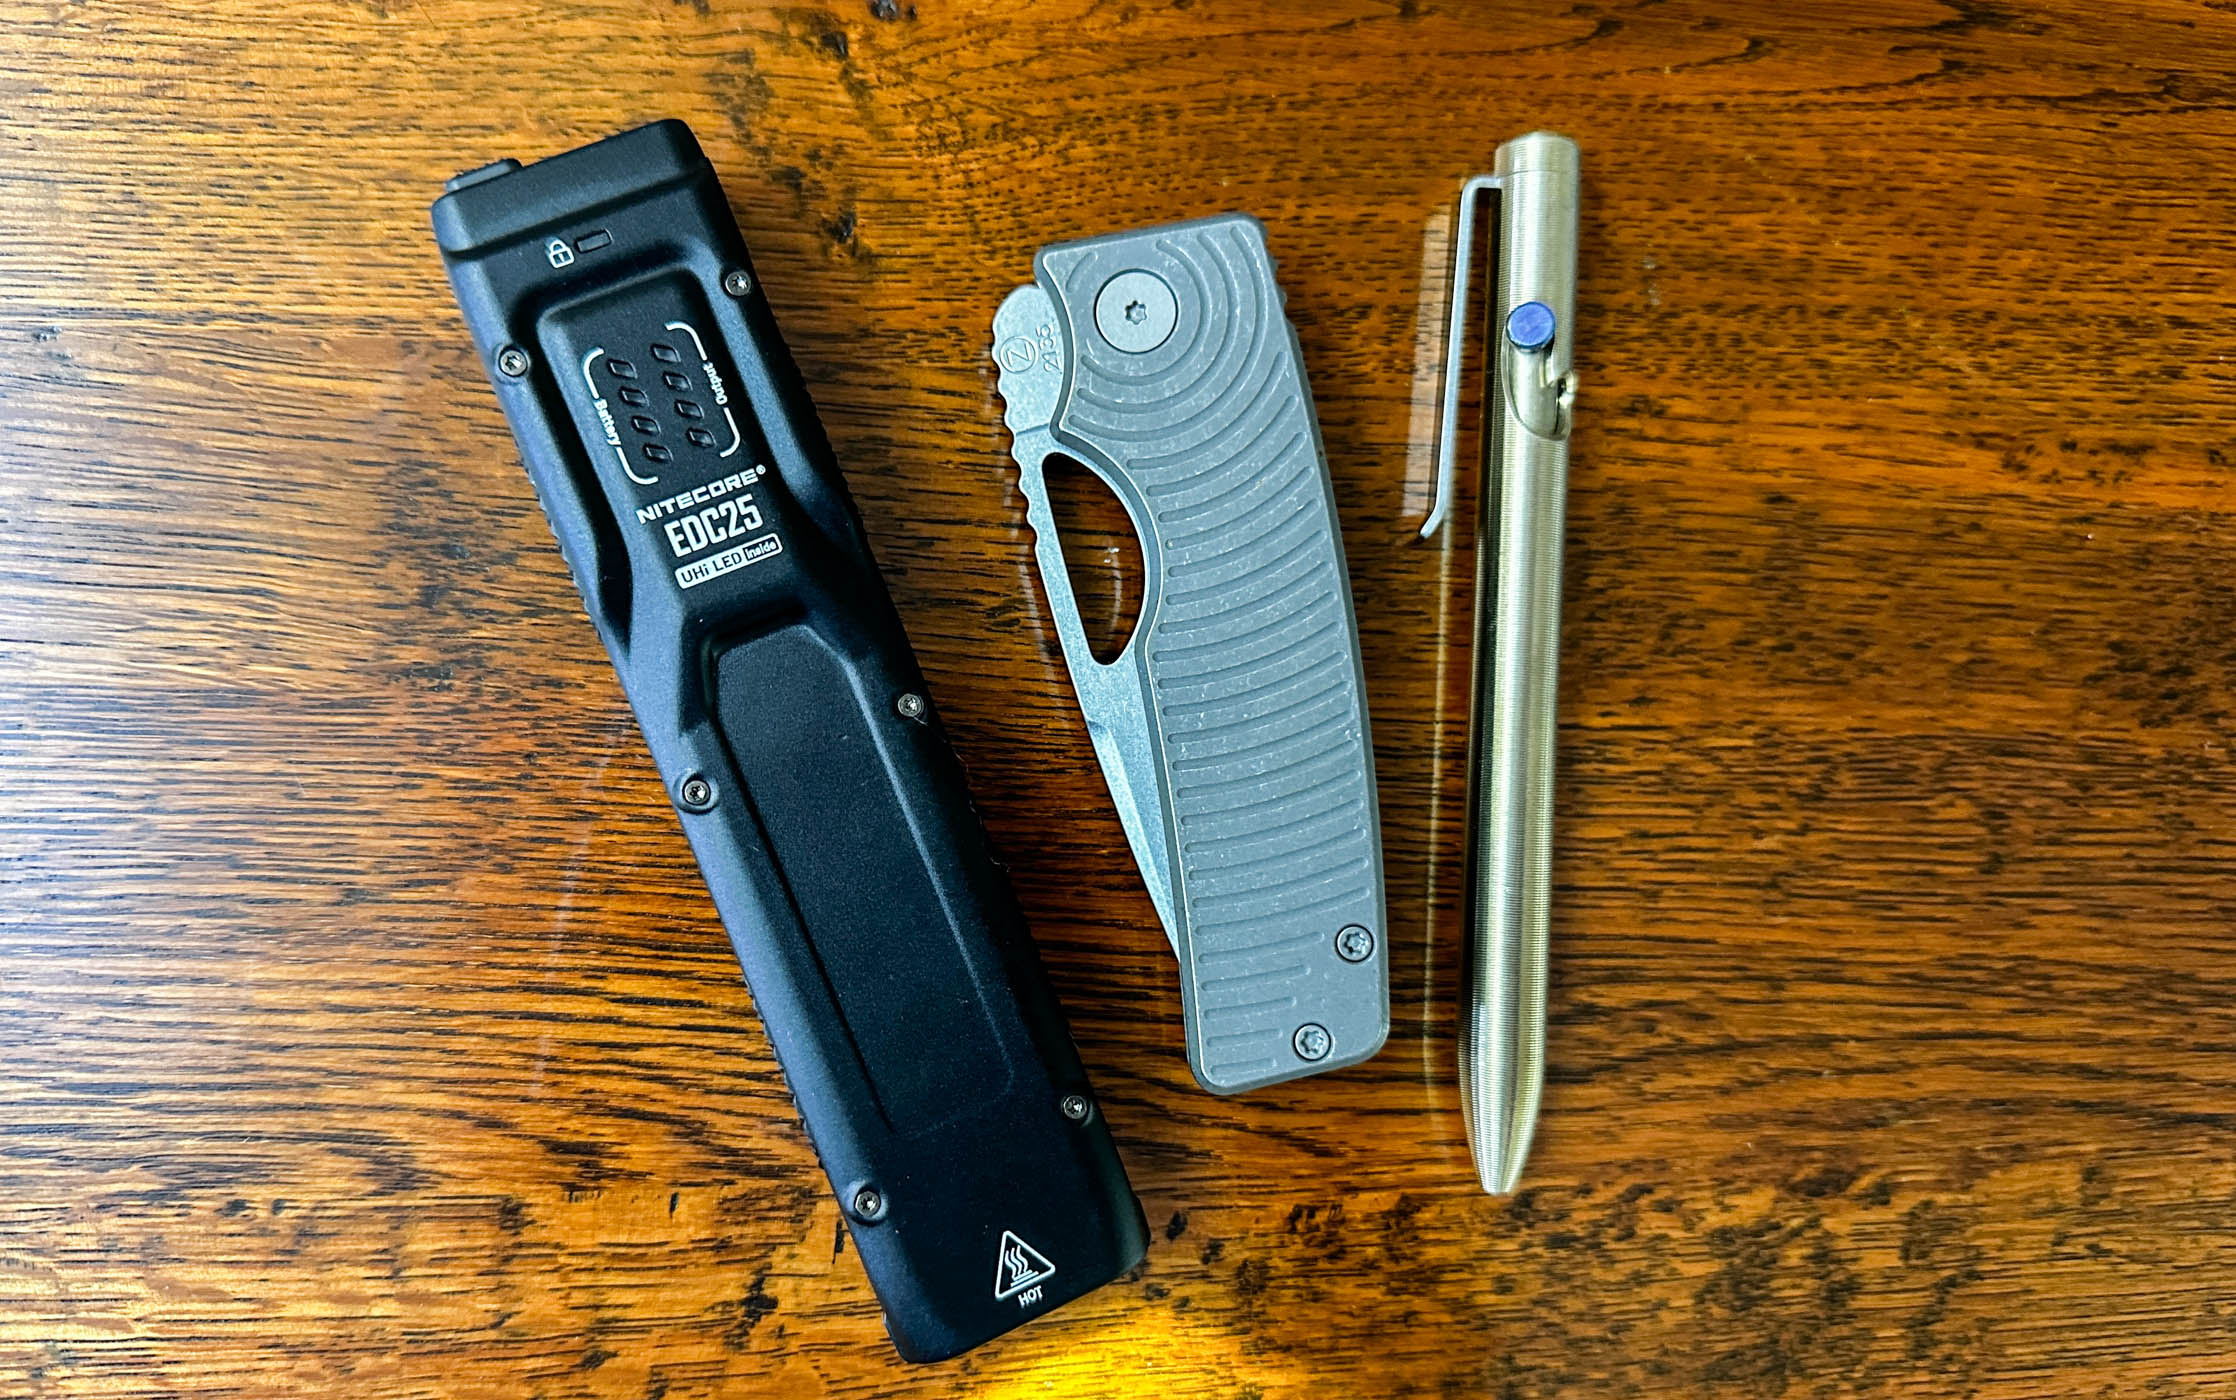 Choosing the right EDC flashlight is a matter of personal preference